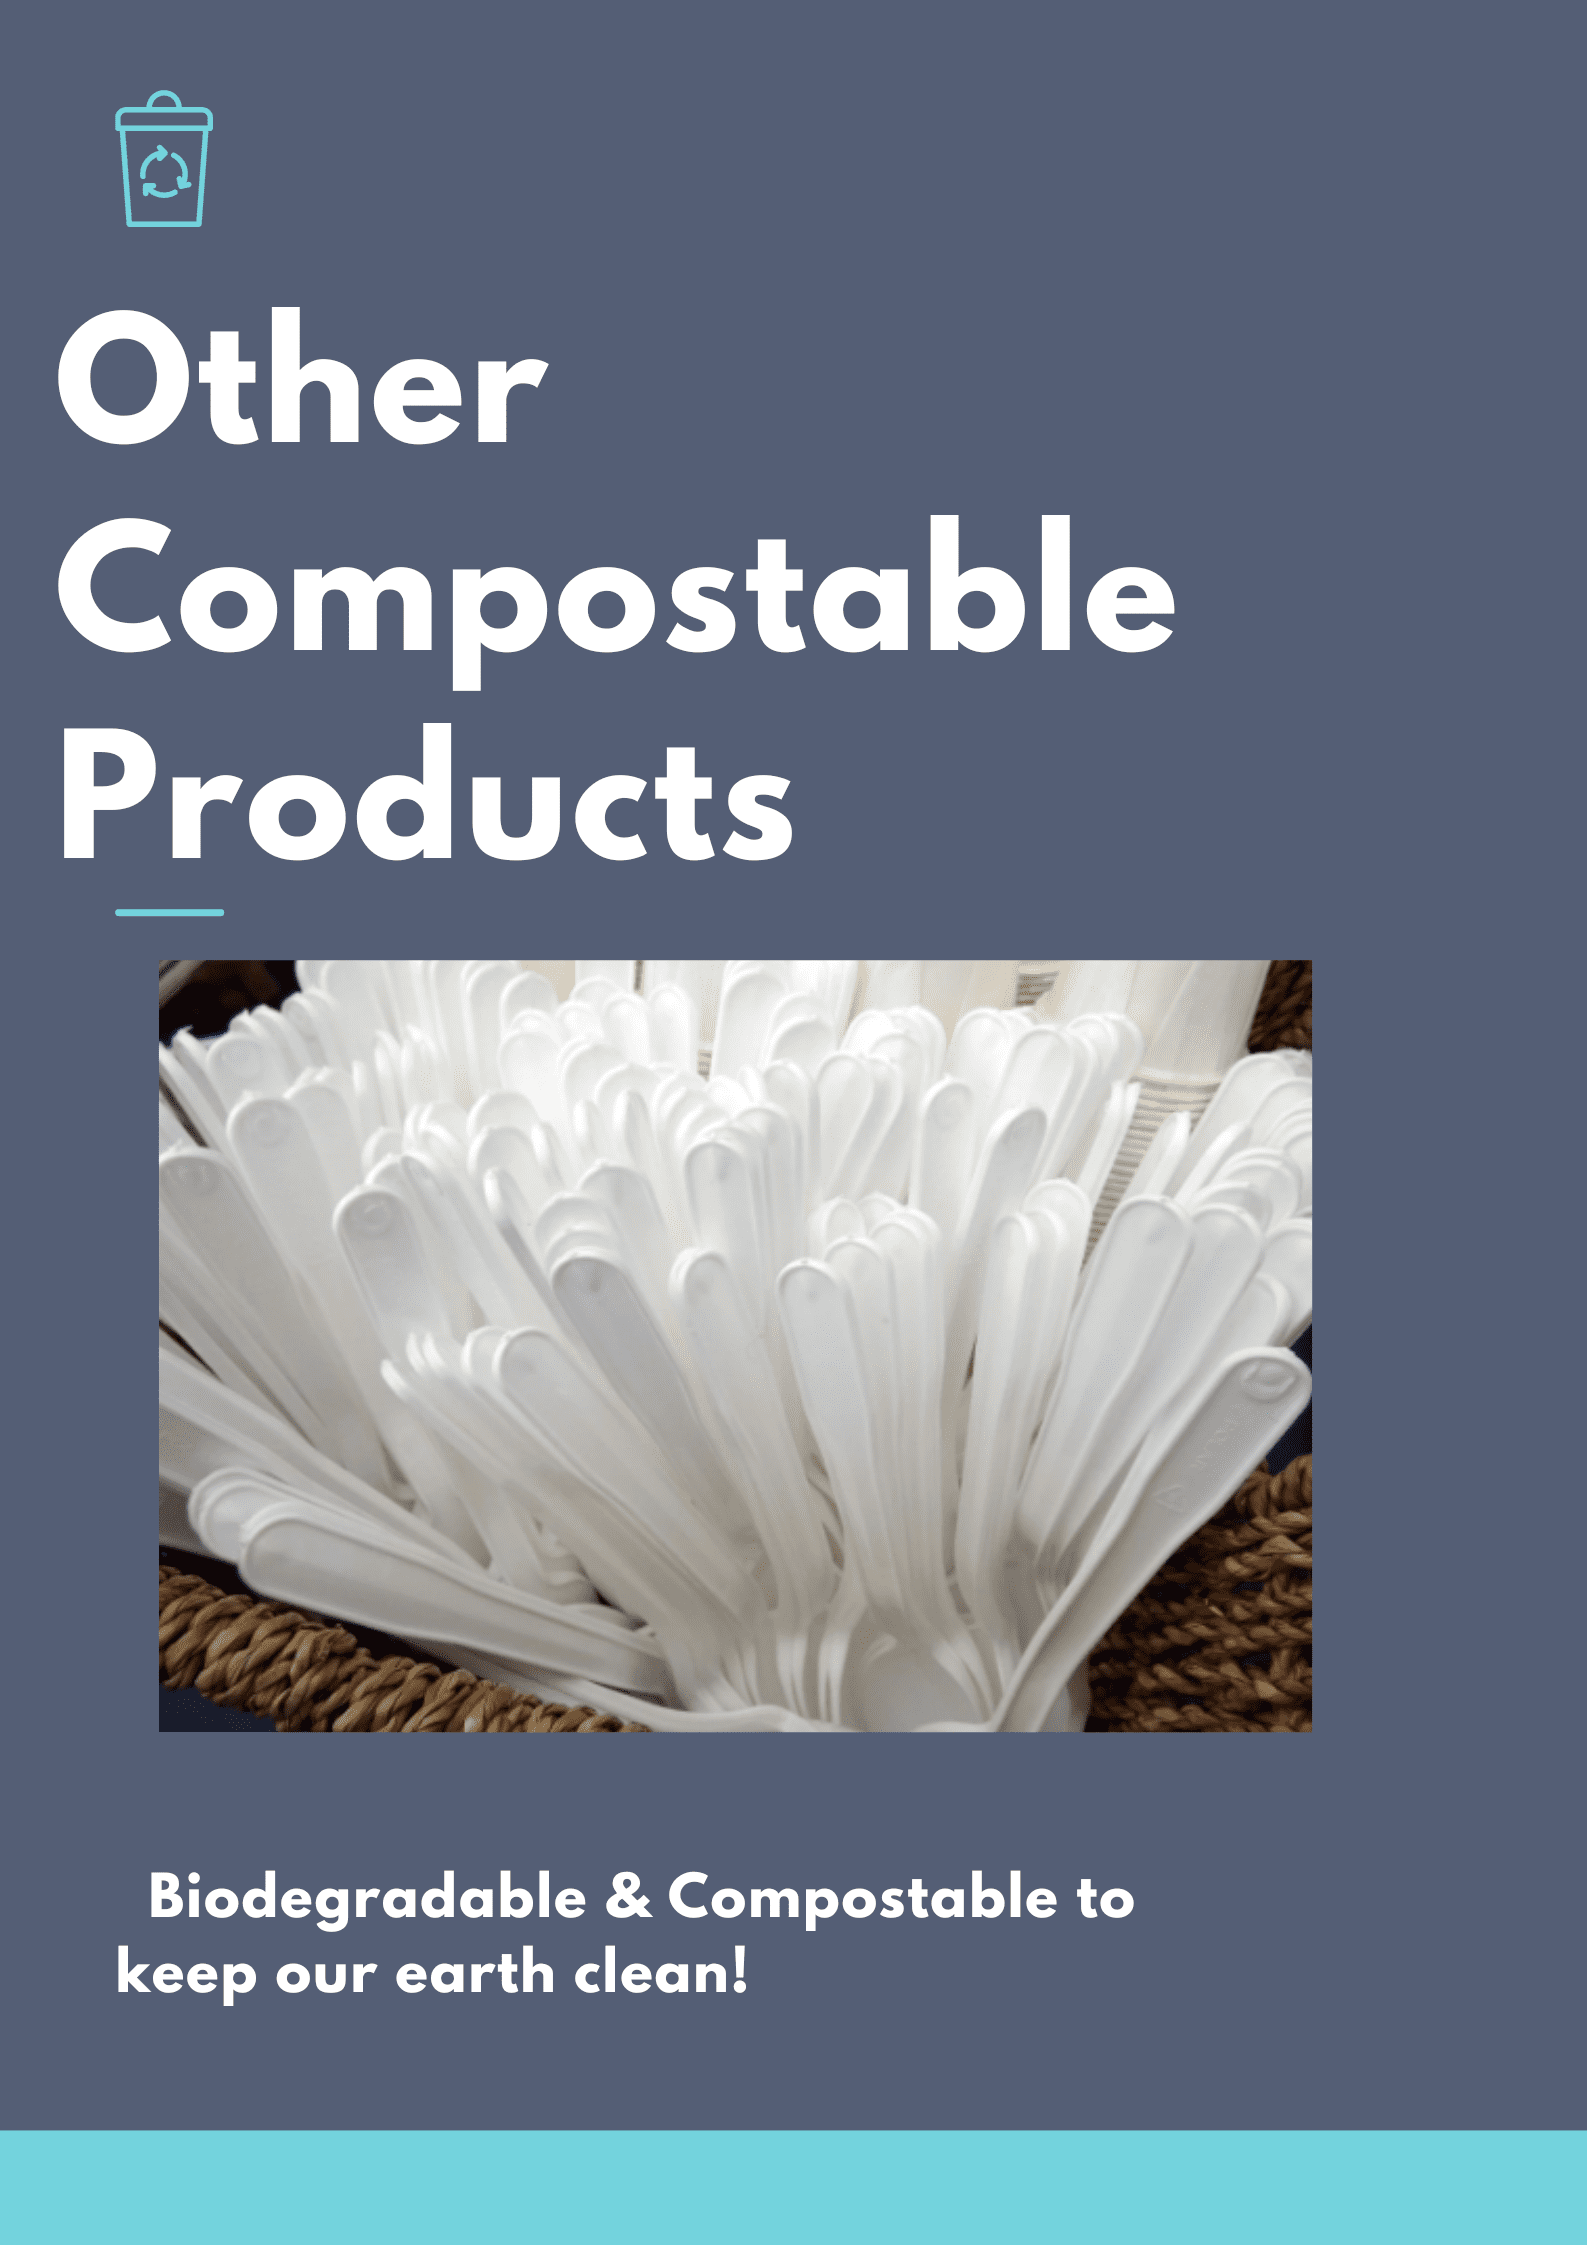 Compostable disposable cutlery